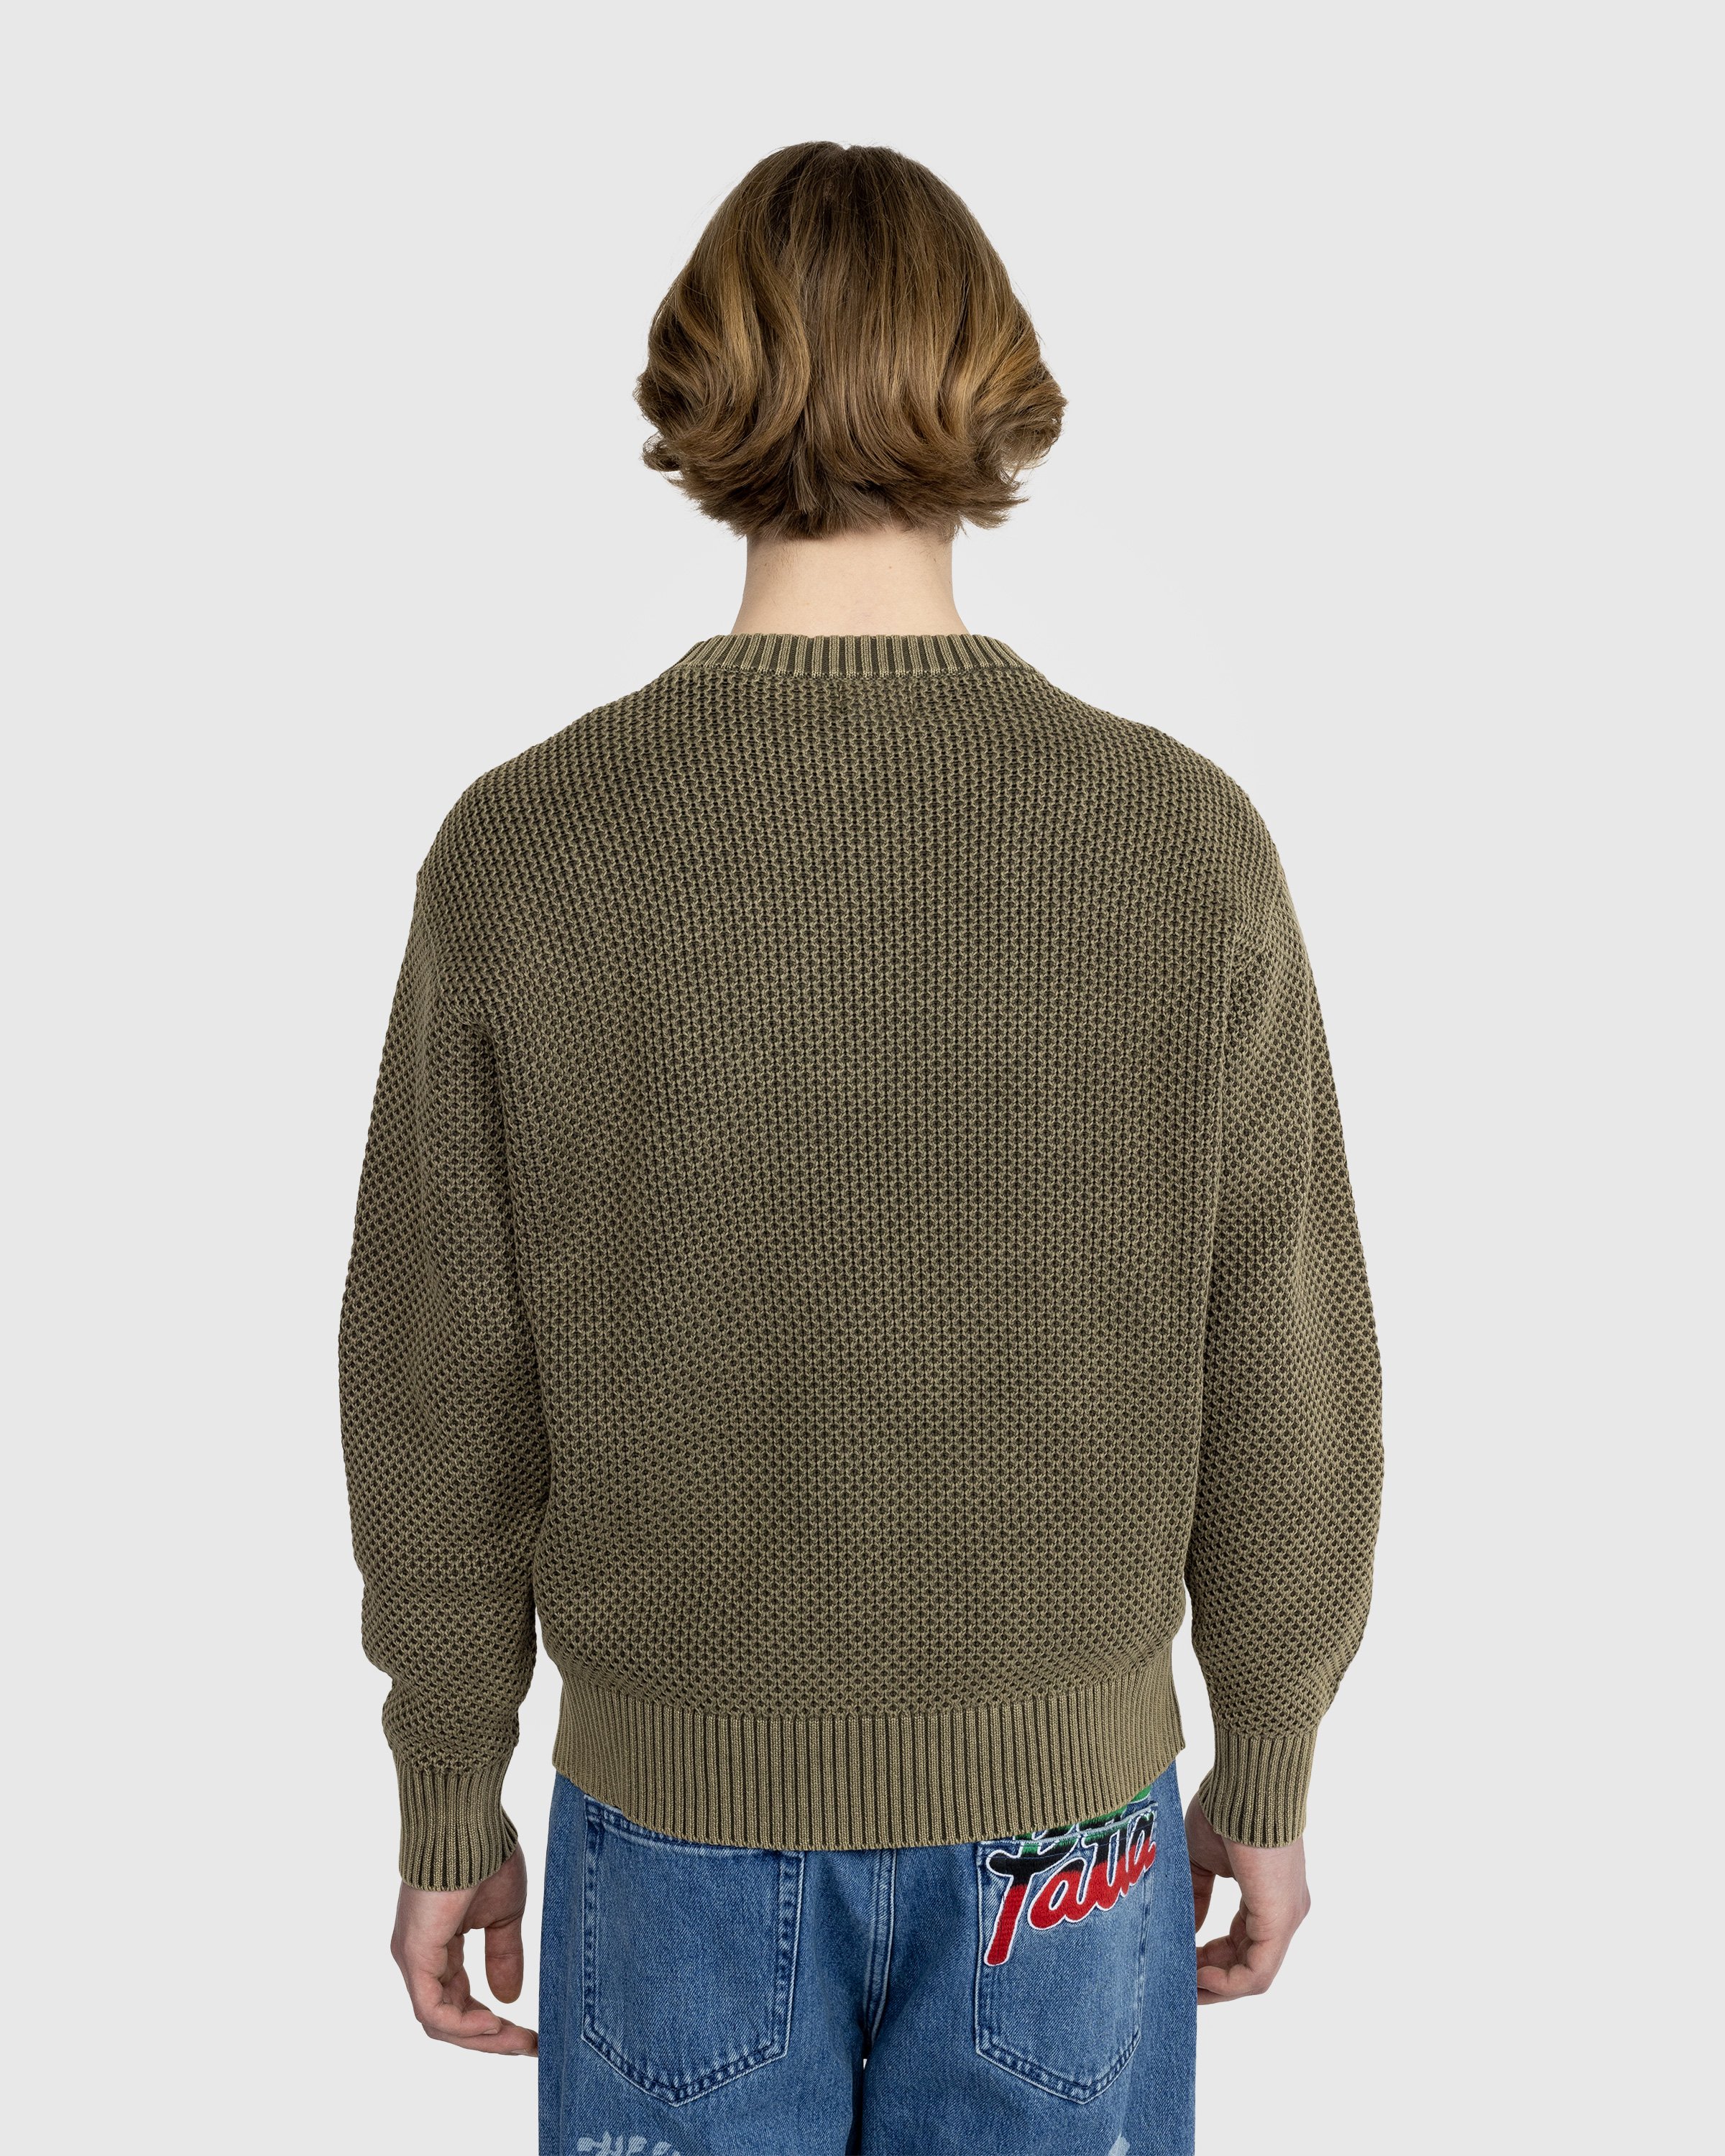 Patta - Honeycomb Knitted Sweater - Clothing - Brown - Image 3